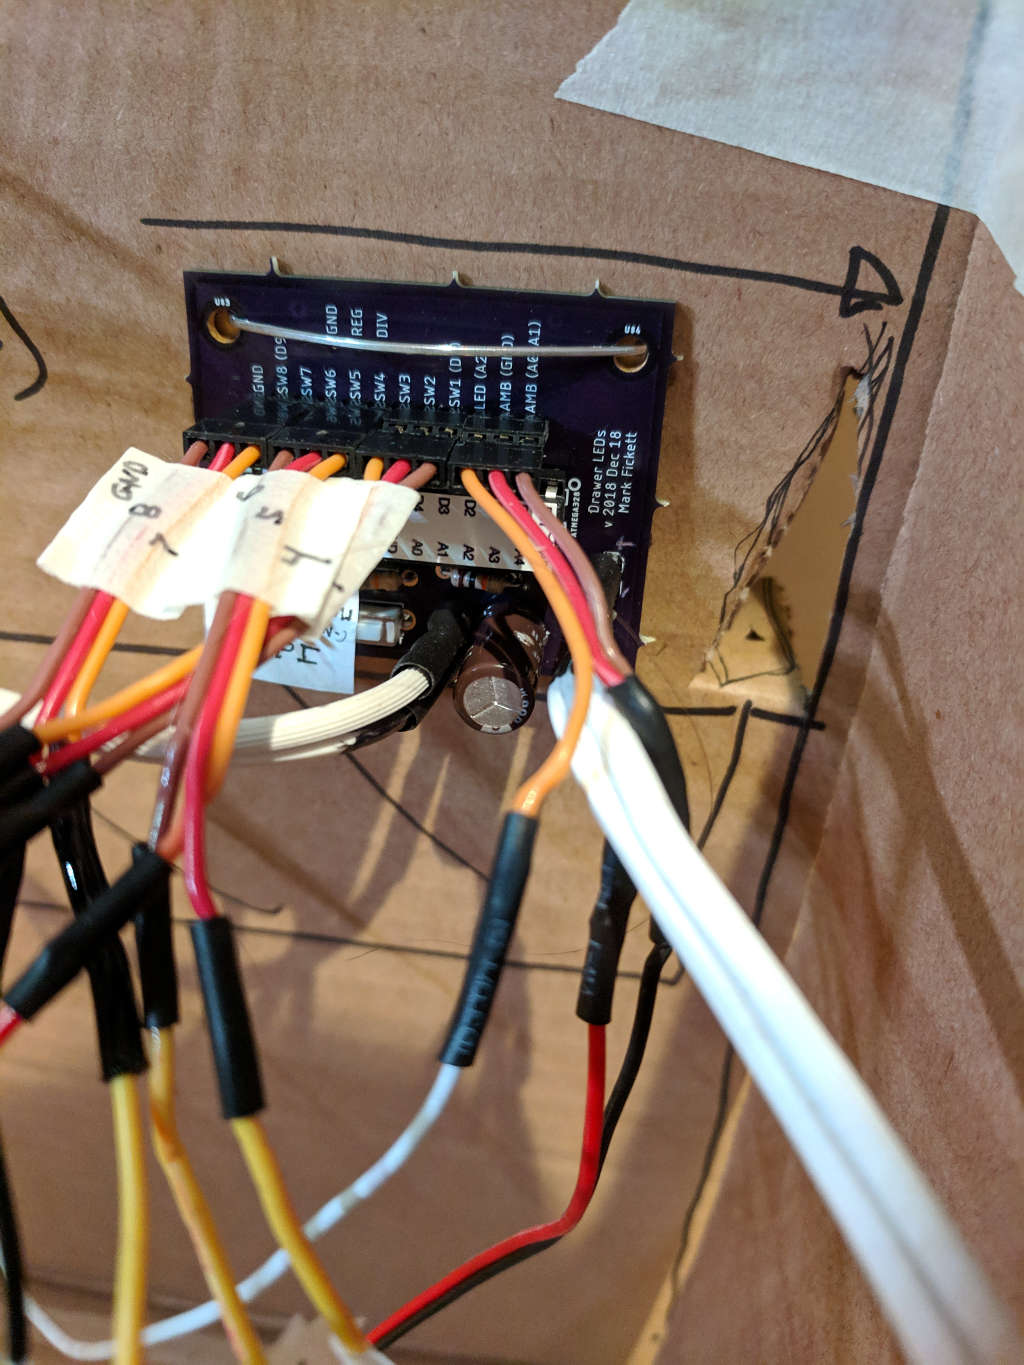 installed pcb, above